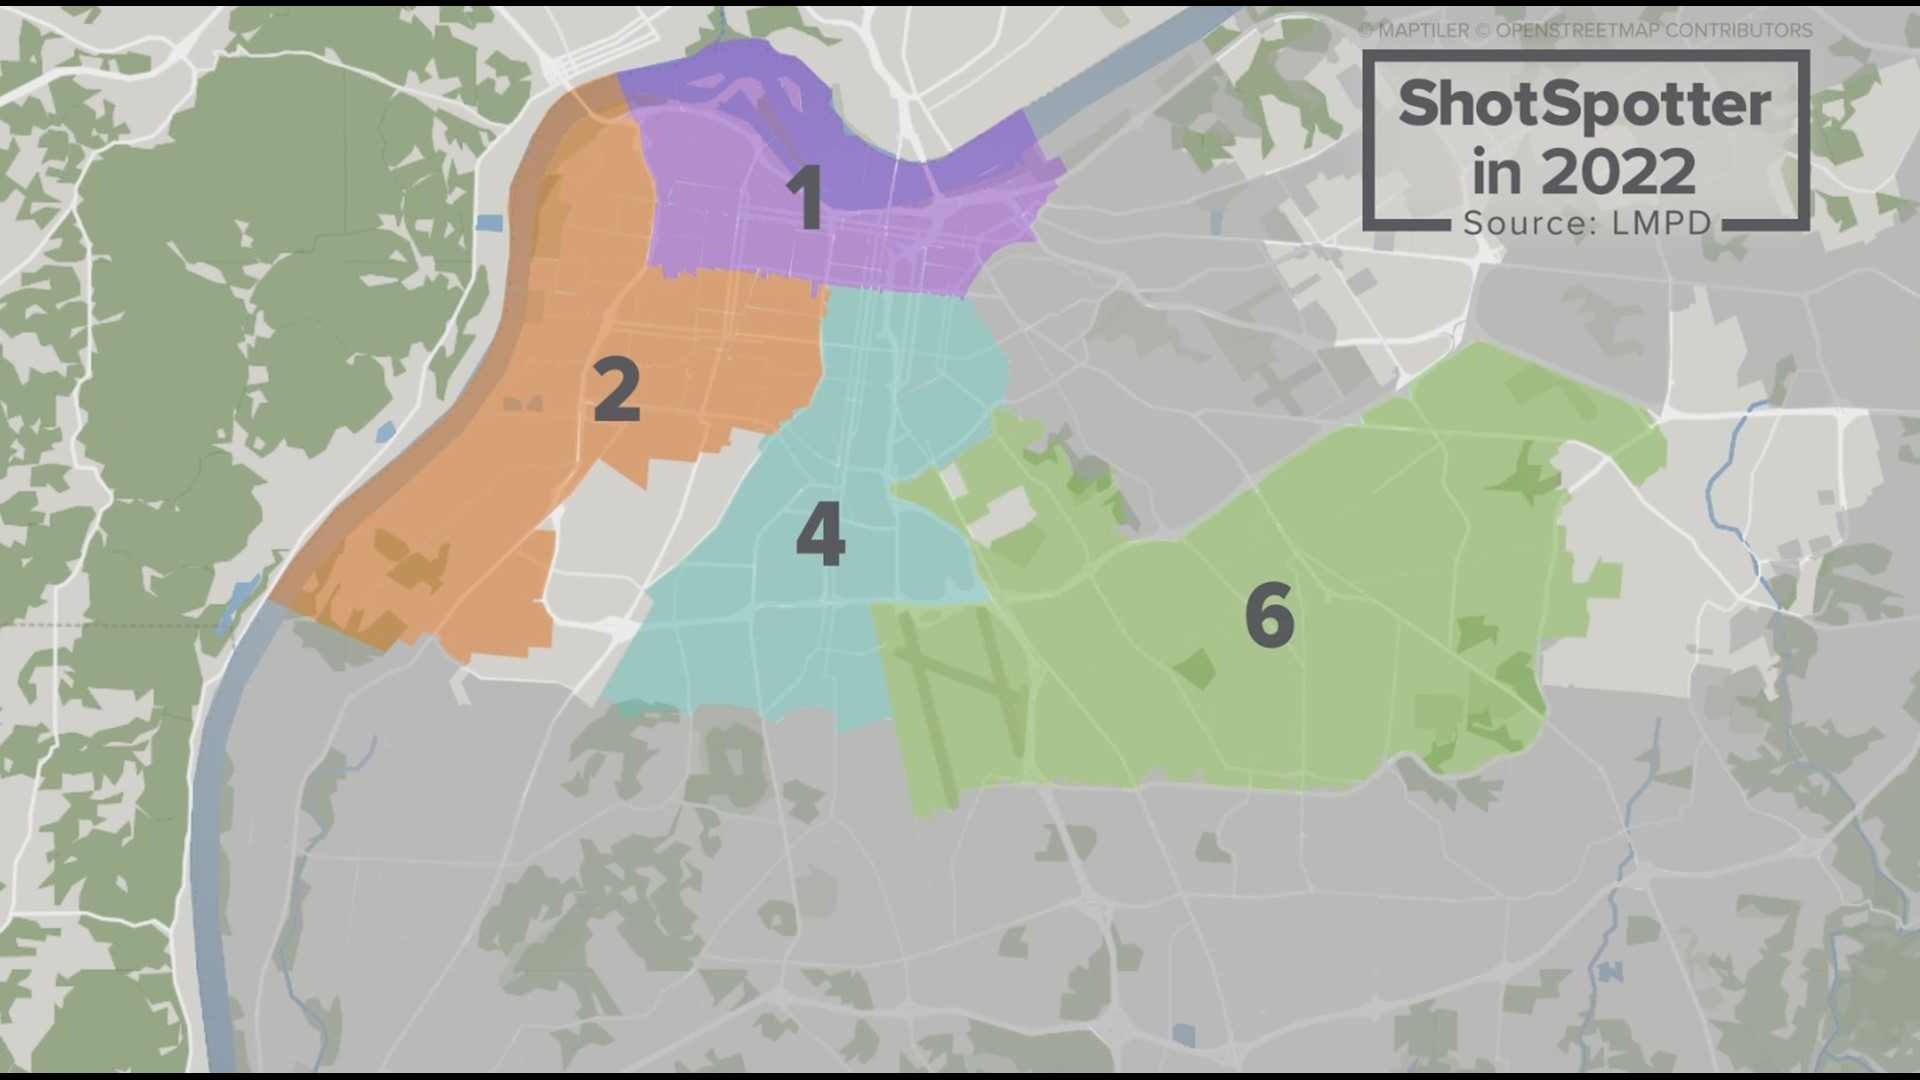 Louisville Police's ShotSpotter devices are spread over six square miles in the First, Second, Fourth and Sixth divisions.